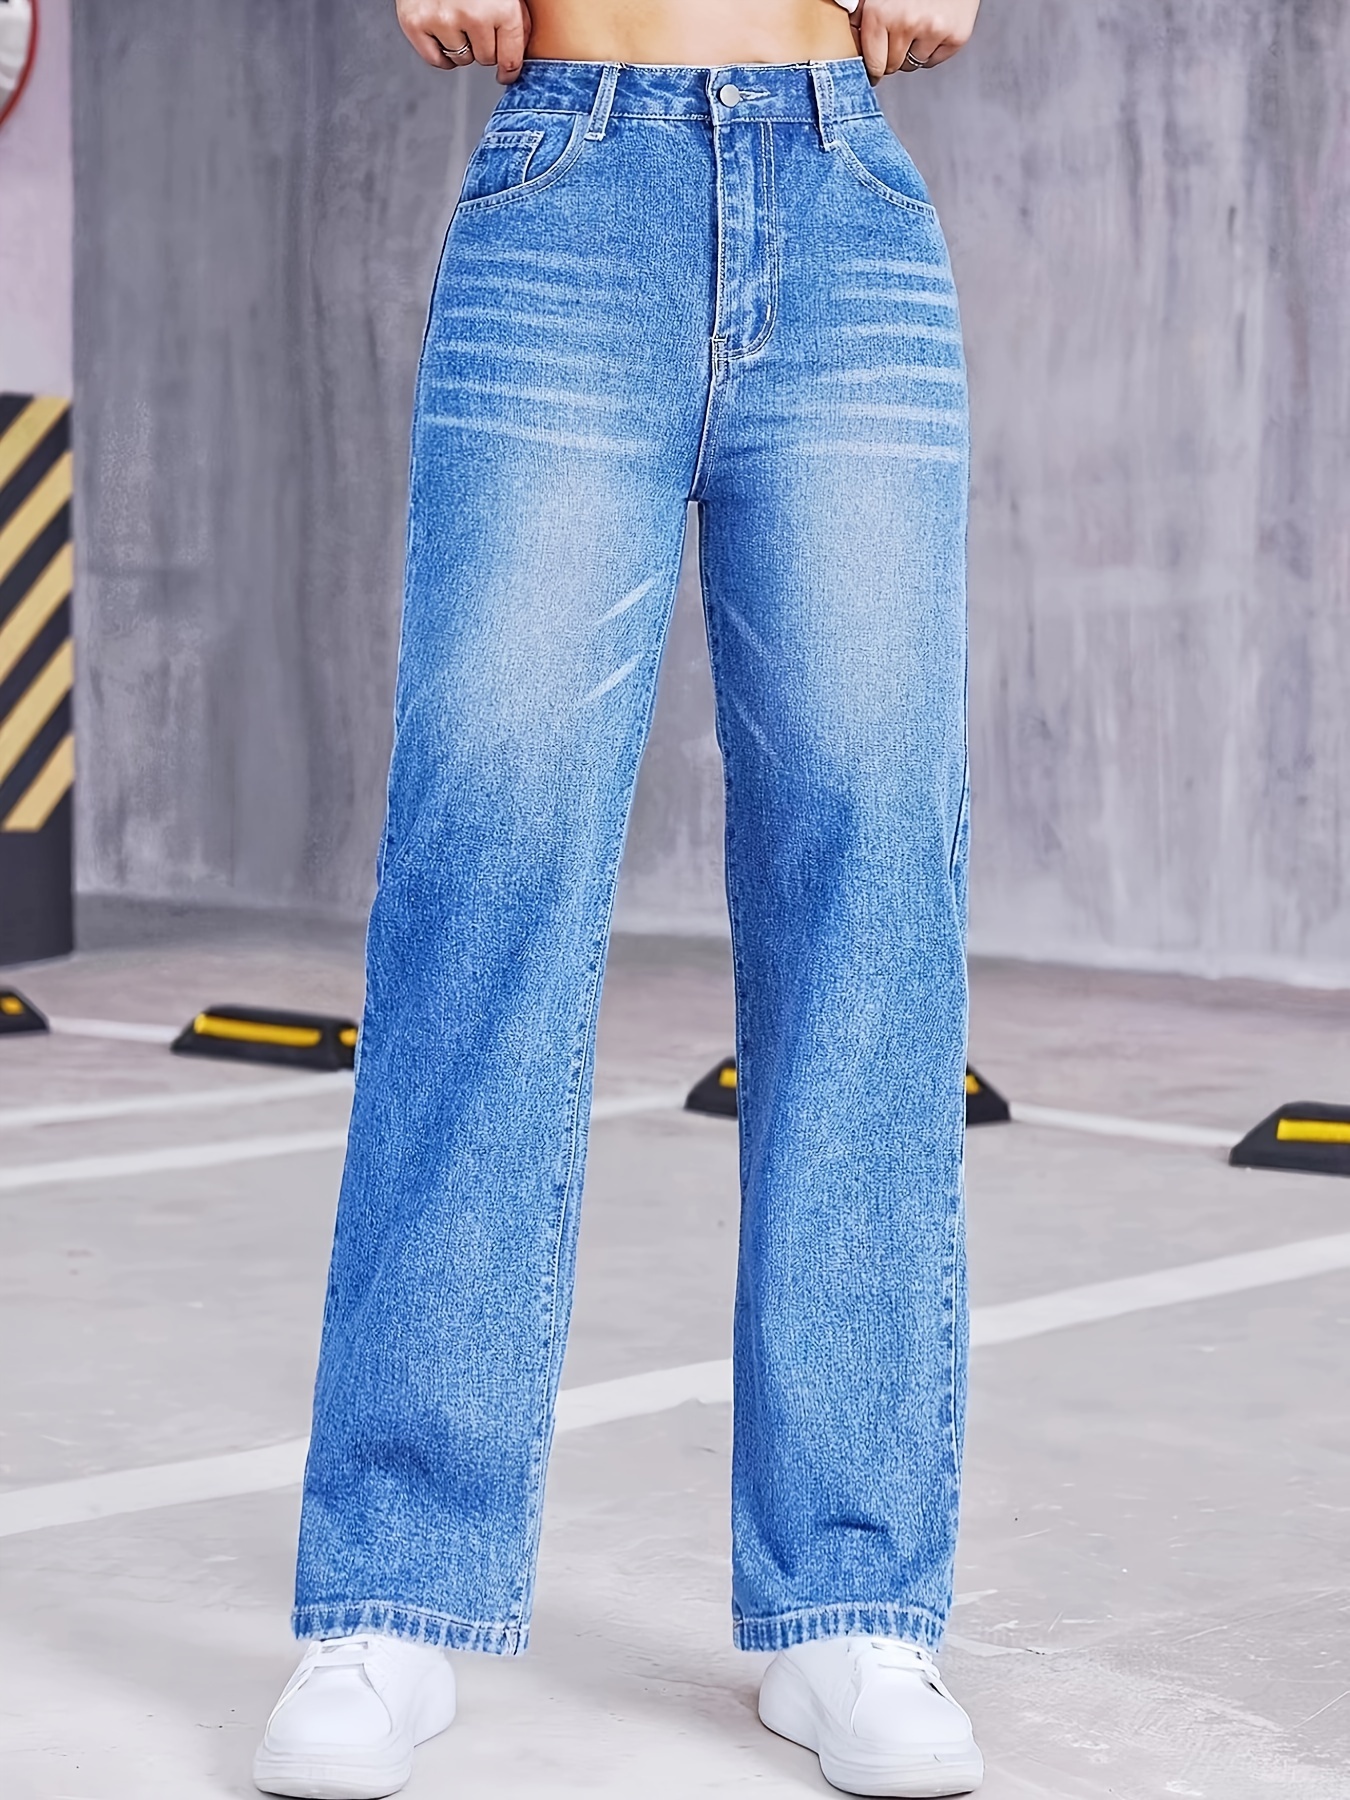 Loose Fit Versatile Mom Jeans, Slant Pockets Non-Stretch Casual Tapered  Jeans, Women's Denim Jeans & Clothing